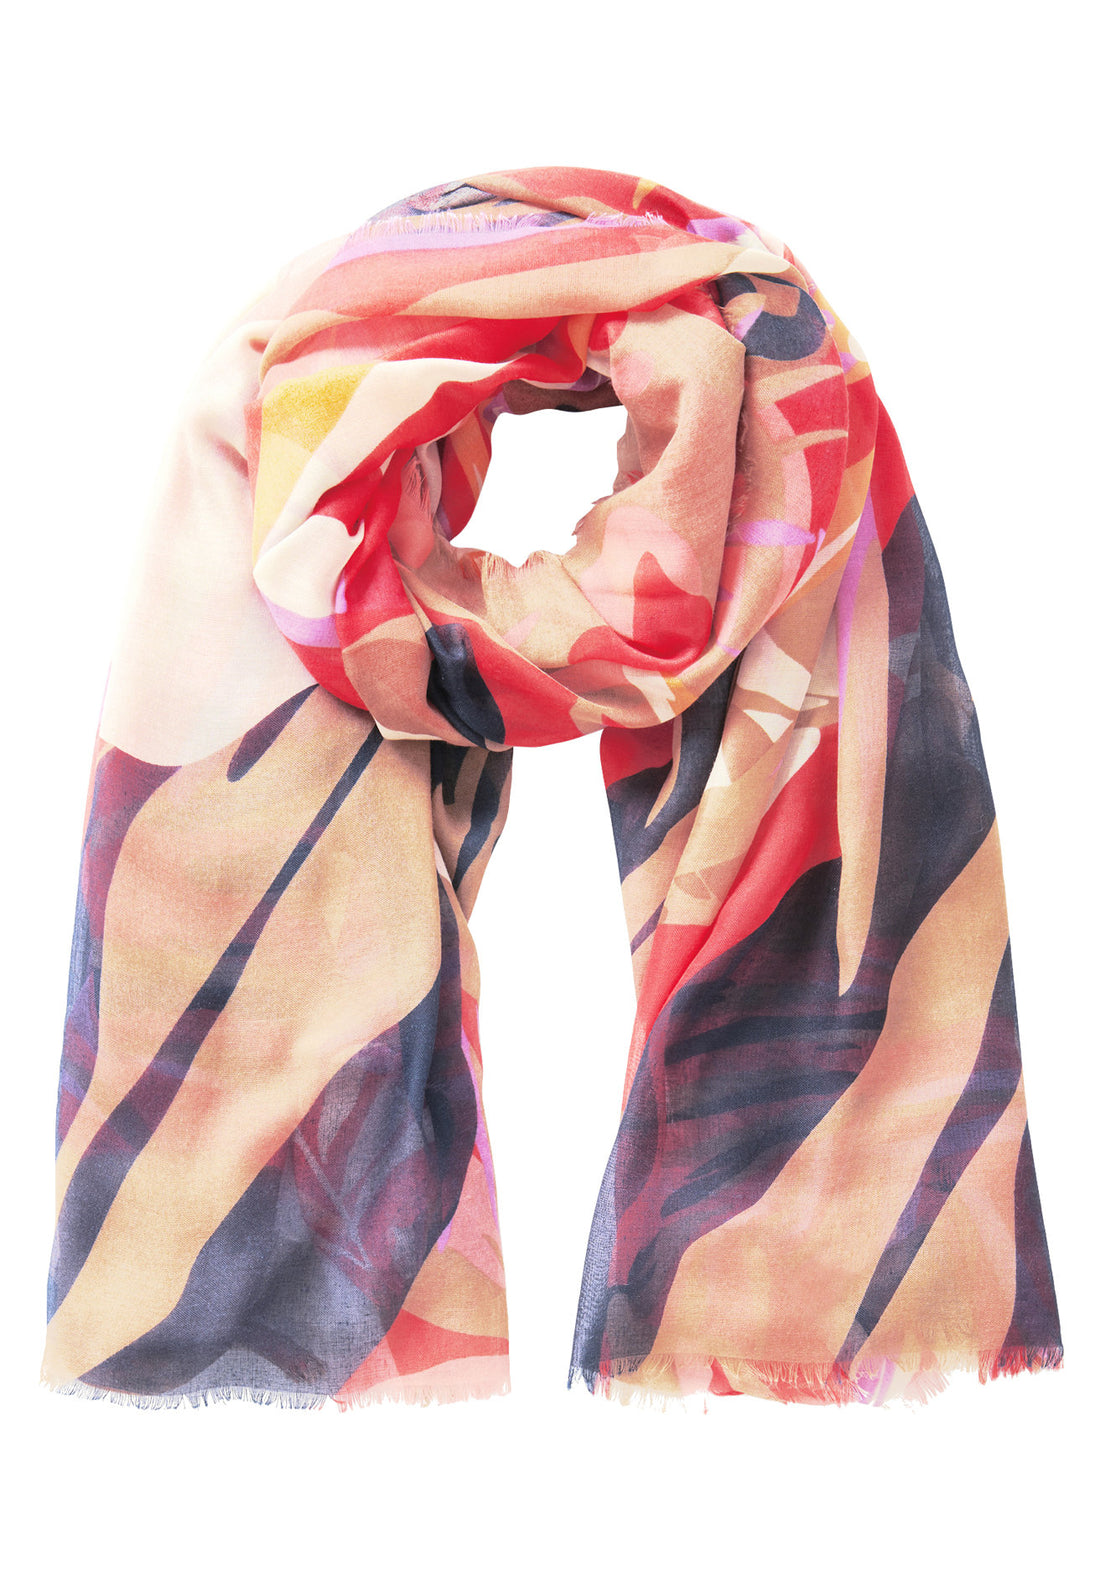 Printed Woven Scarf_3405 2557_4868_01